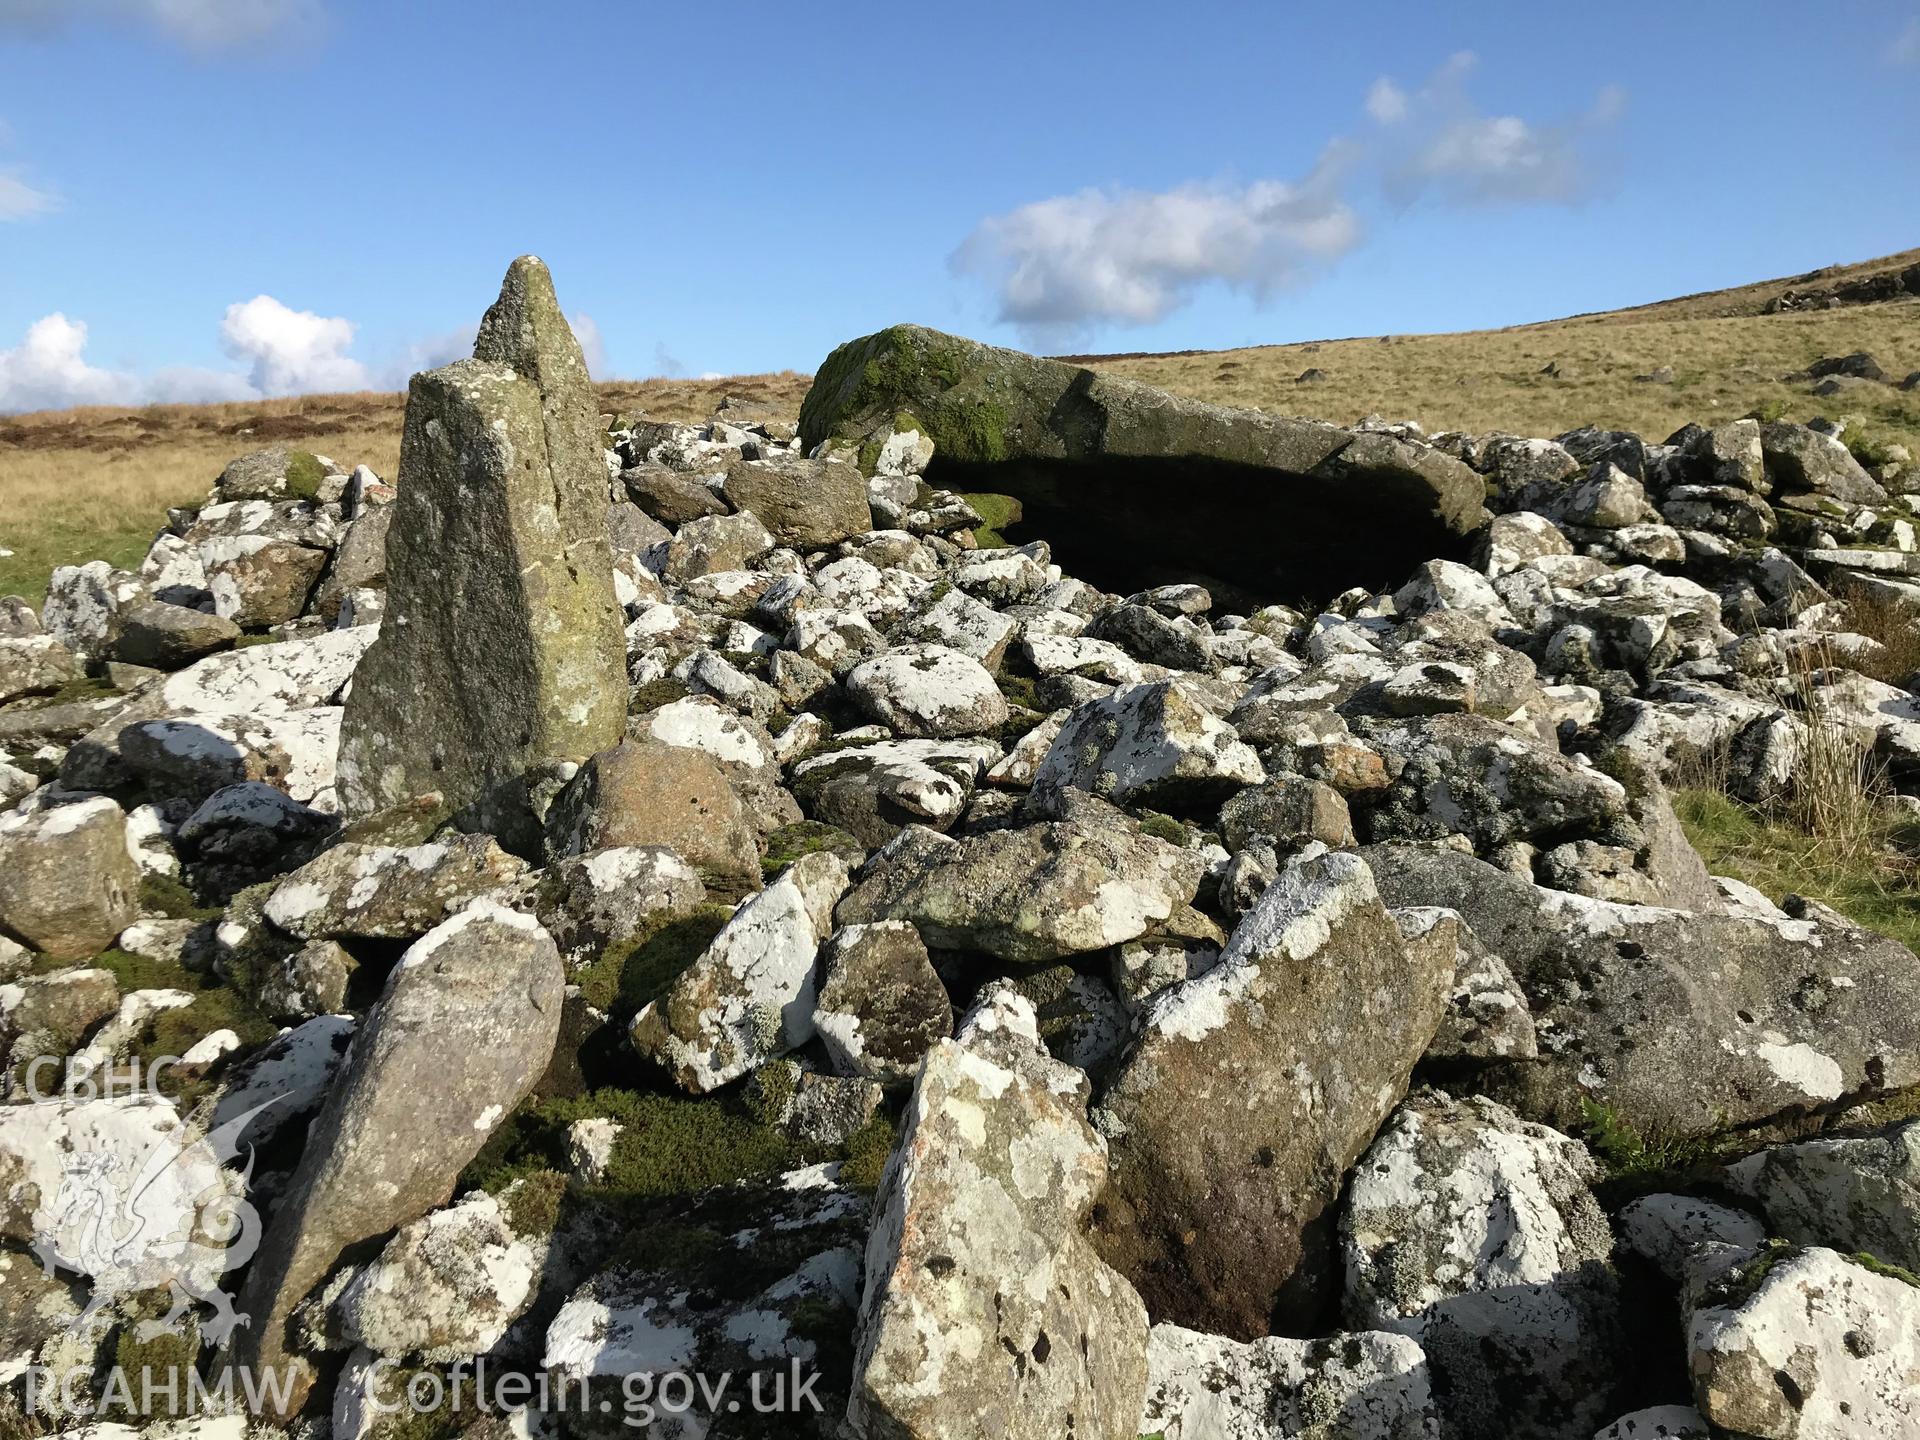 Digital colour photograph showing Carn Menyn Cairn or chambered tomb, Mynachlog Ddu, taken by Paul Davis on 22nd October 2019.